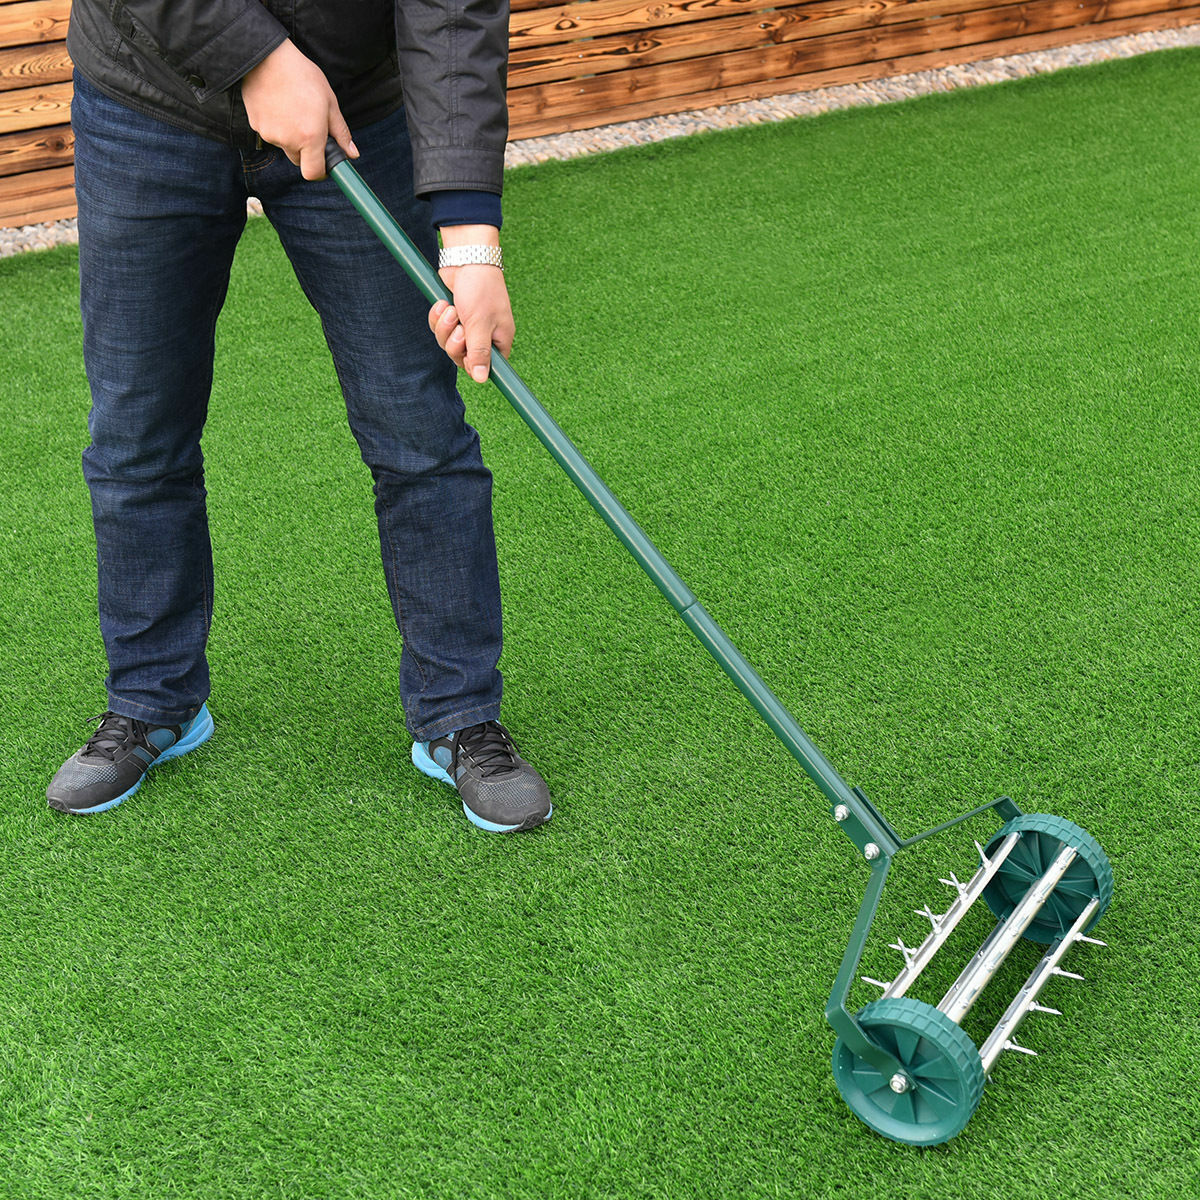 Heavy Duty Rolling Garden Lawn Aerator Roller with Steel Handle - Perfect for Home Grass Maintenance